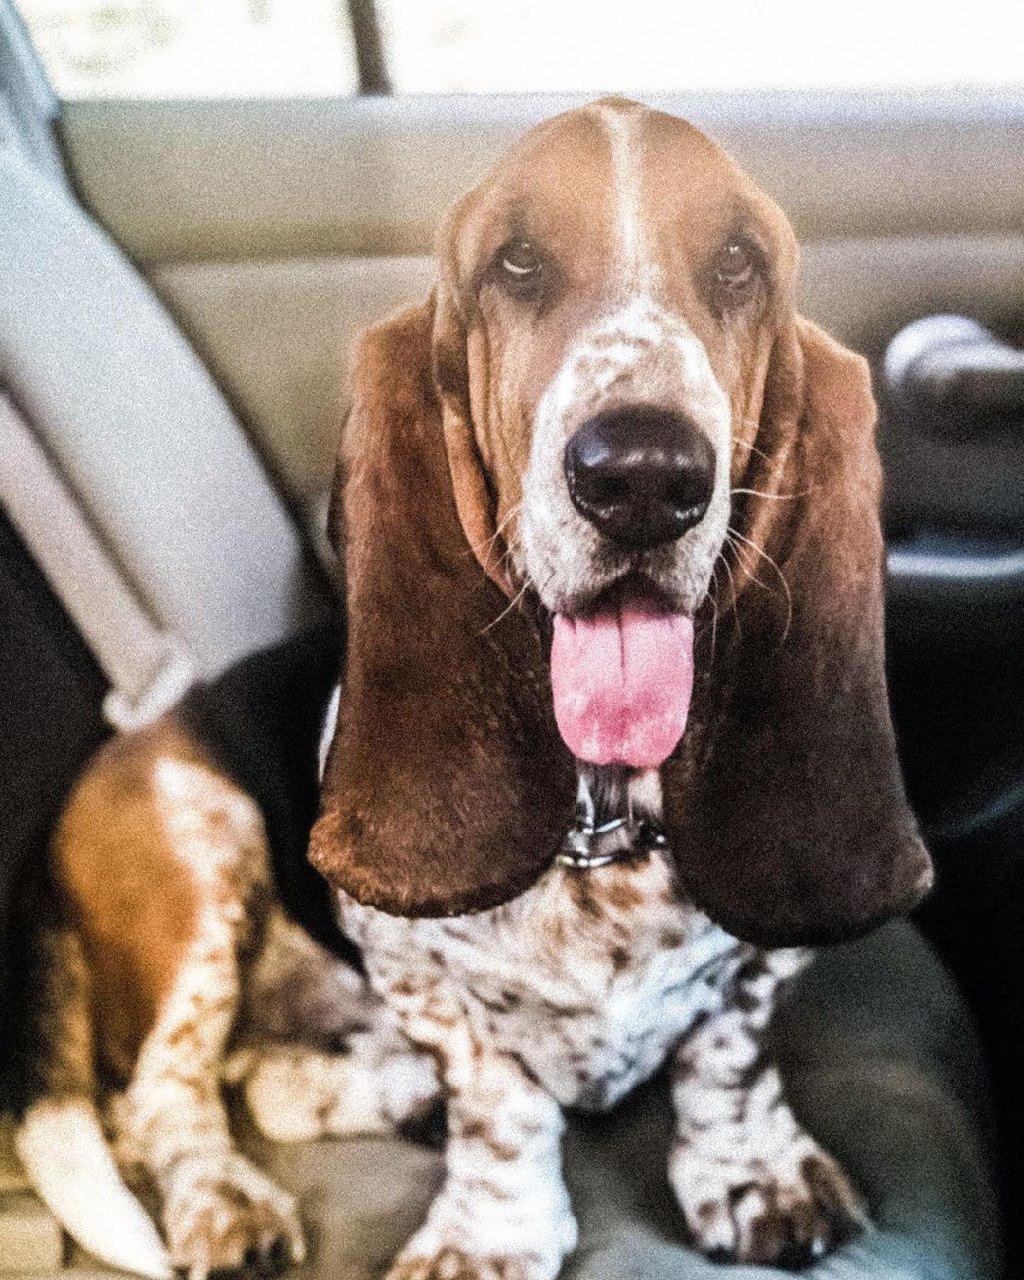 A Basset Hound sitting in the back seat while sticking its tongue out